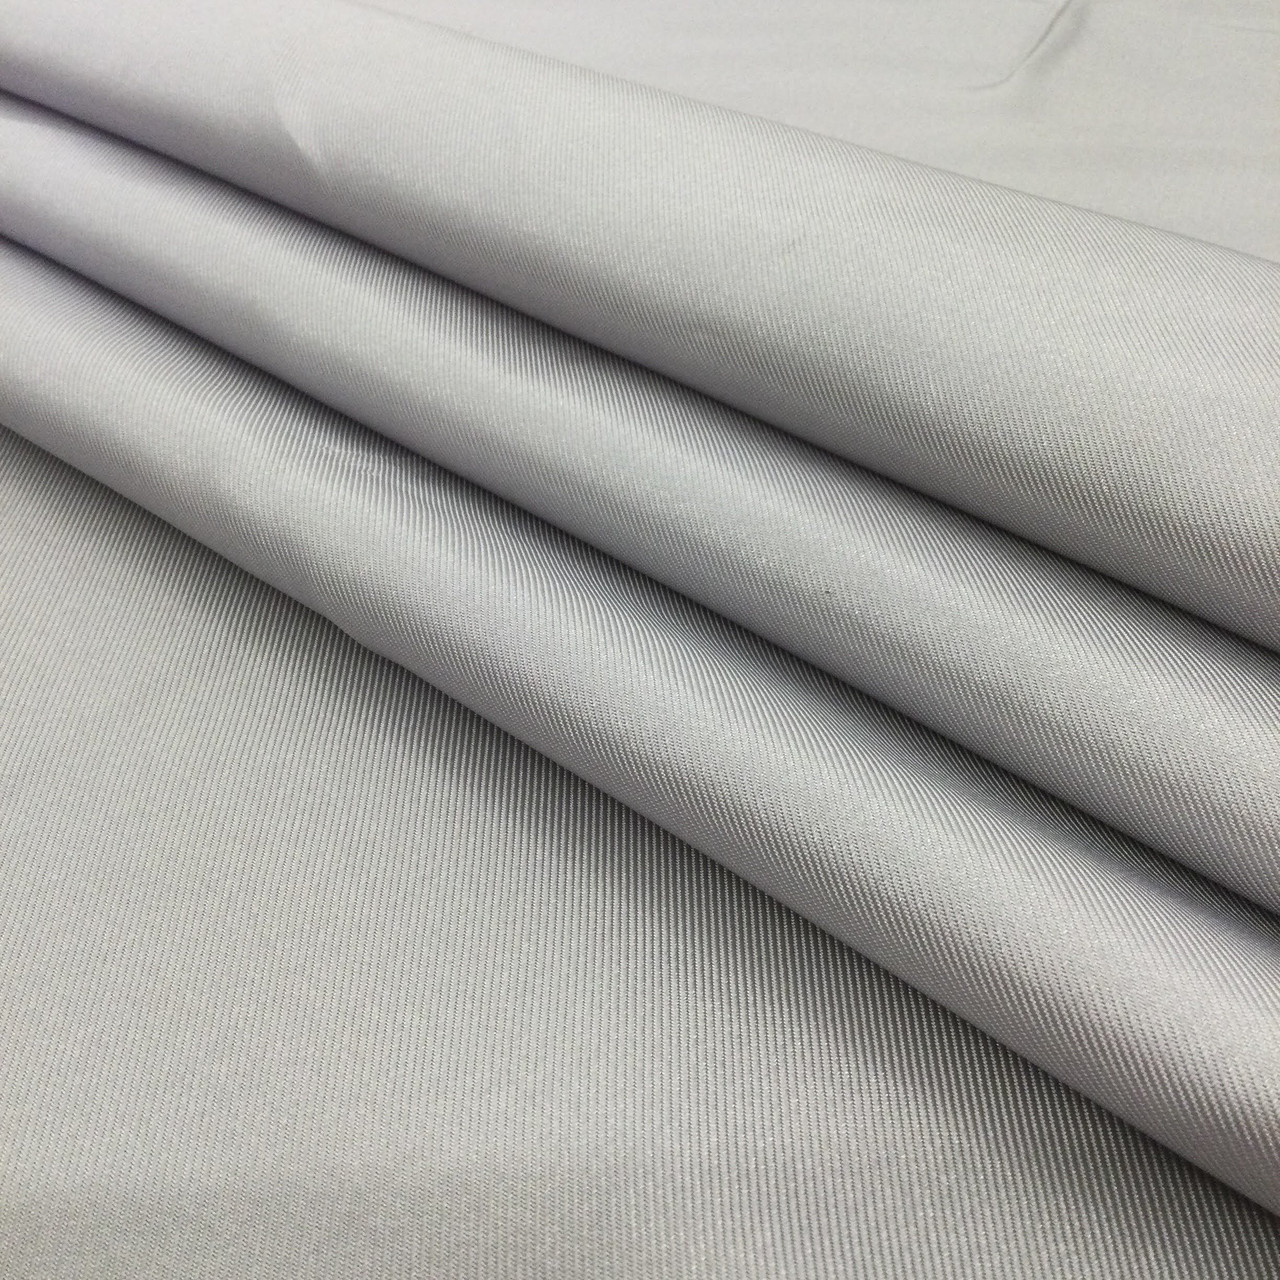 Silver Gray Diagonal Texture Lining Fabric | Midweight | 100% Polyester |  Clothing and Apparel | 60 inch Wide | Sold By the Yard